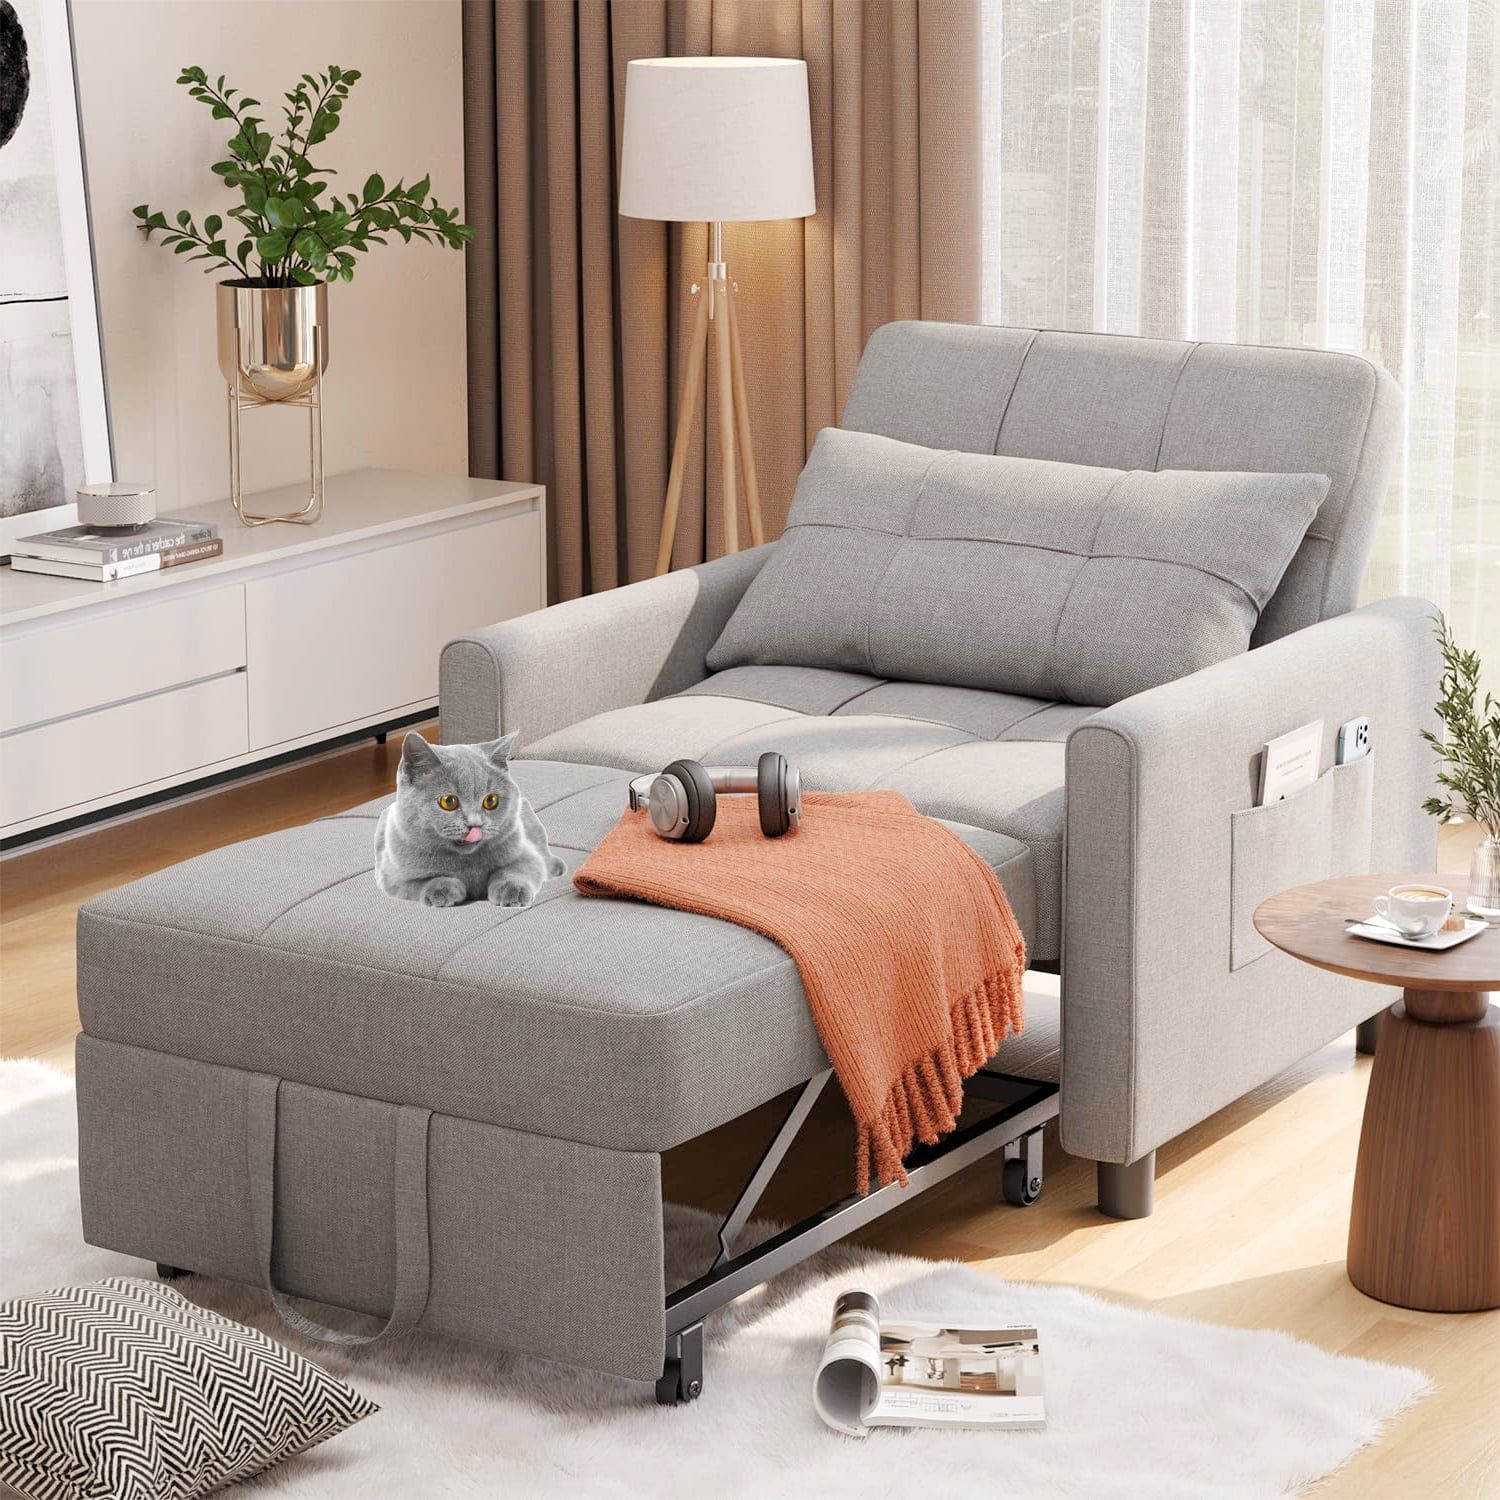 Lofka Sofa Bed, Convertible Chair Bed 3 In 1 Single Couch Bed, Light Gray –  Walmart Regarding Convertible Light Gray Chair Beds (View 2 of 15)